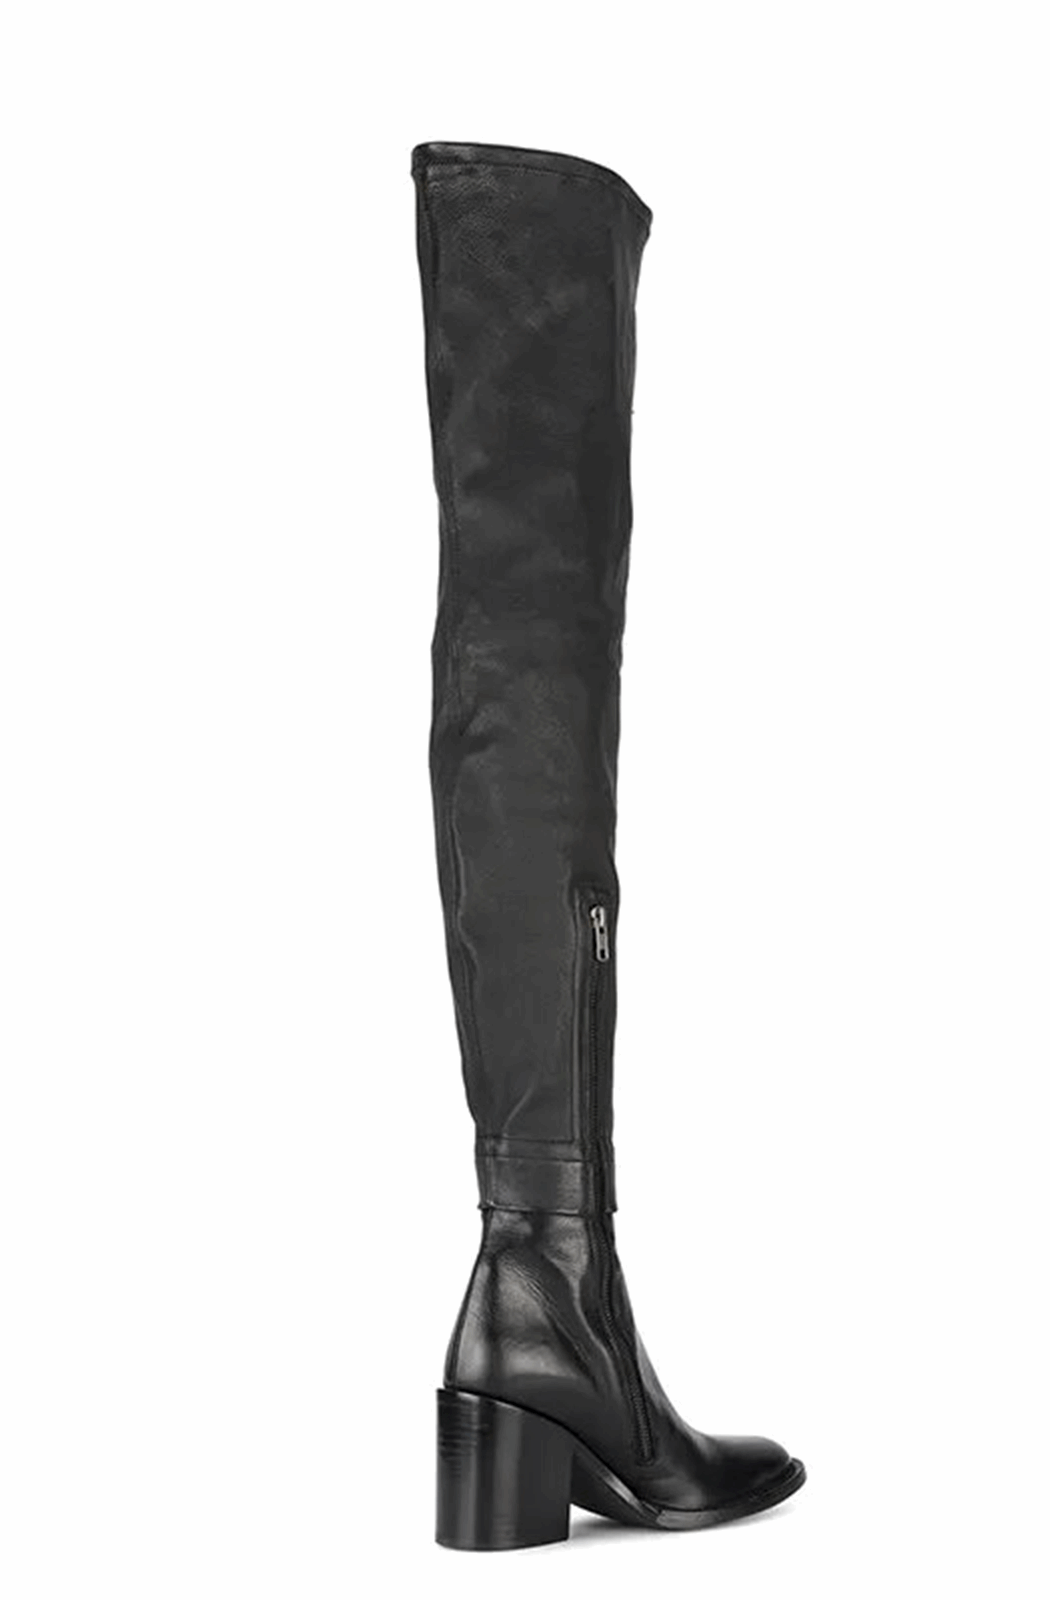 Comfortable chunky heels over the knee boots